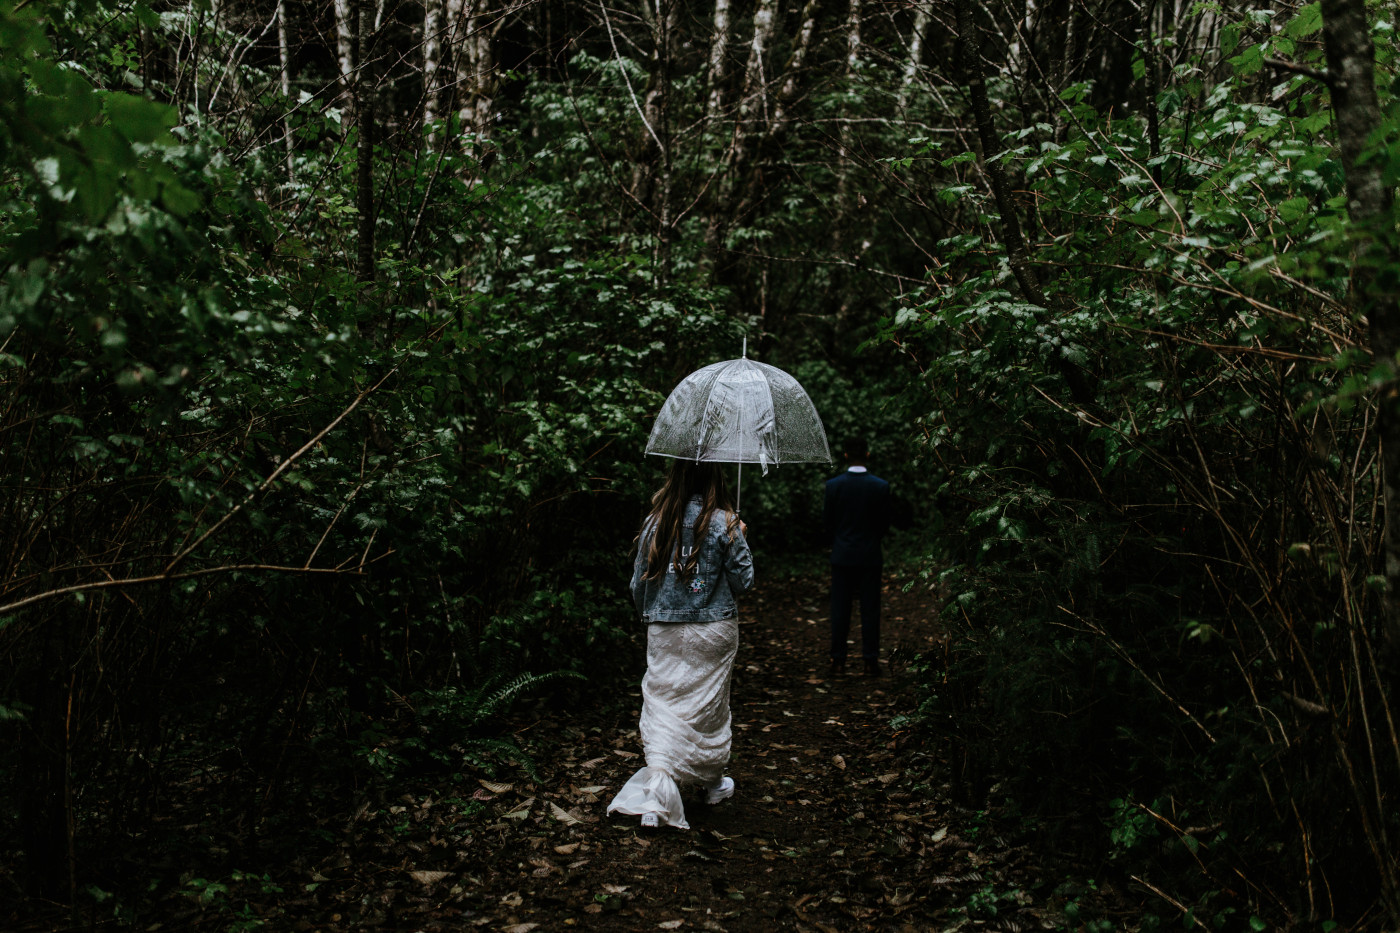 Ariana walks down a path with an umbrella. Elopement photography at Mount Hood by Sienna Plus Josh.